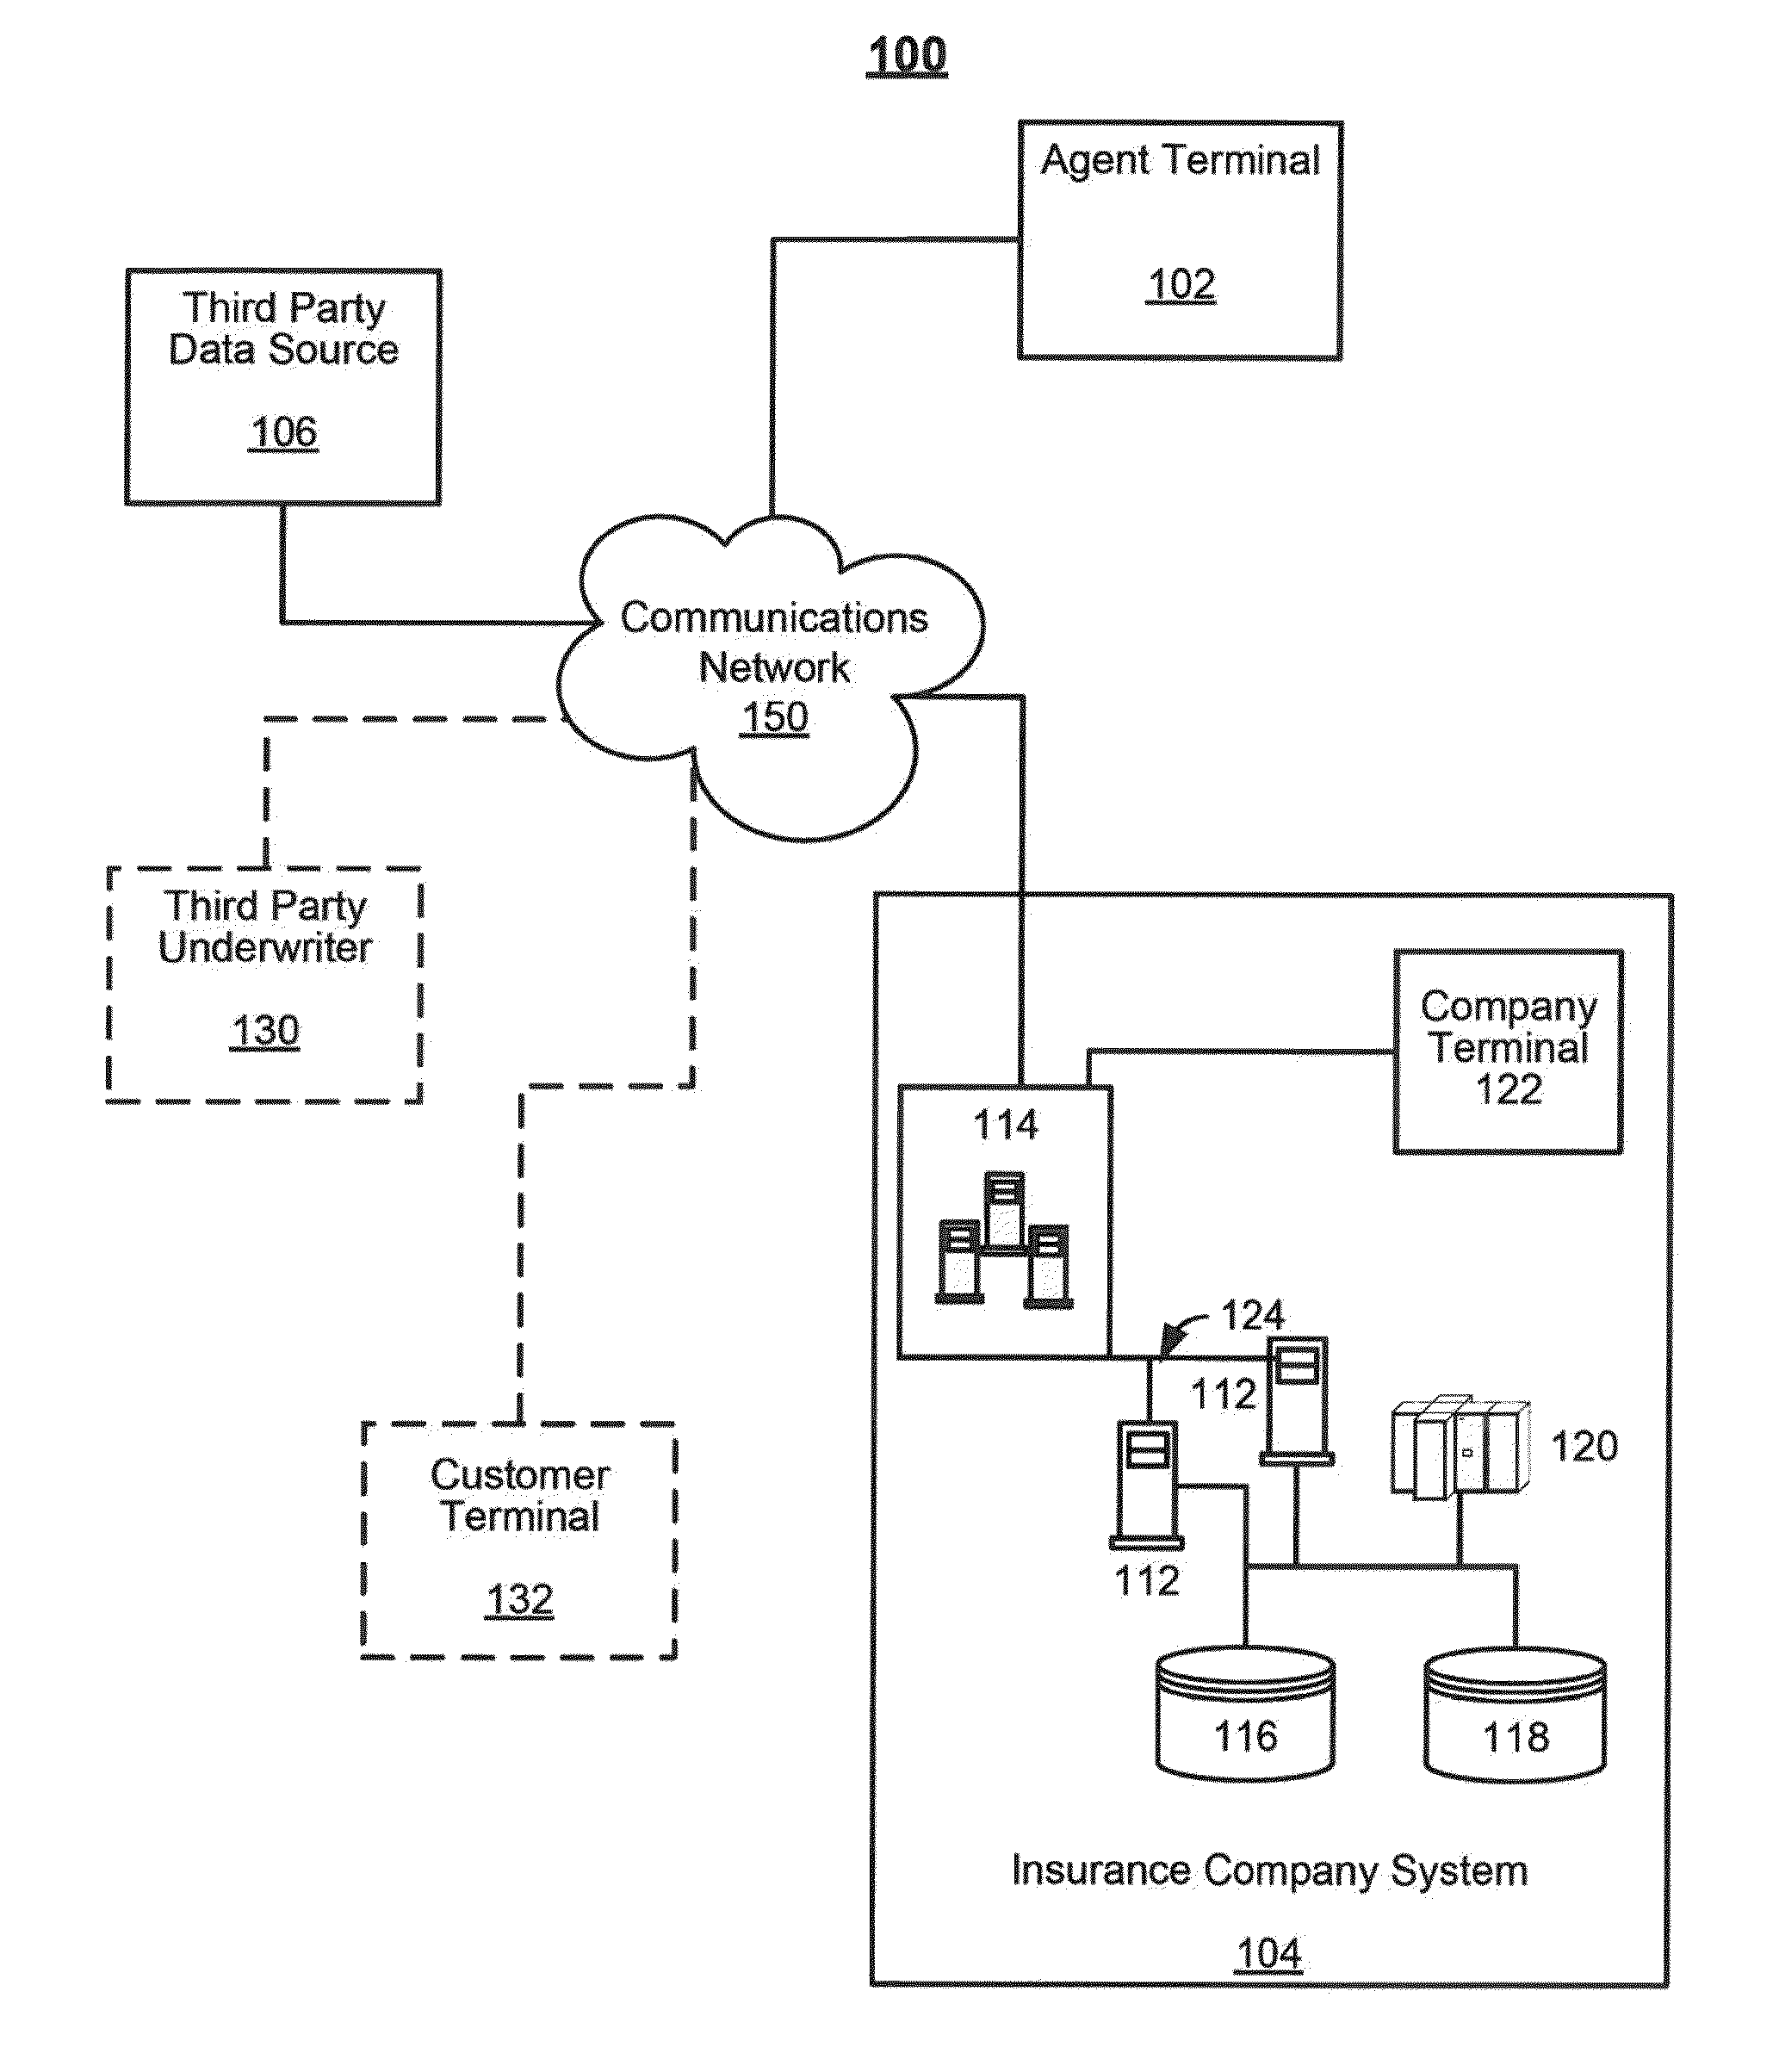 Computerized System and Method for Pre-Filling of Insurance Data Using Third Party Sources